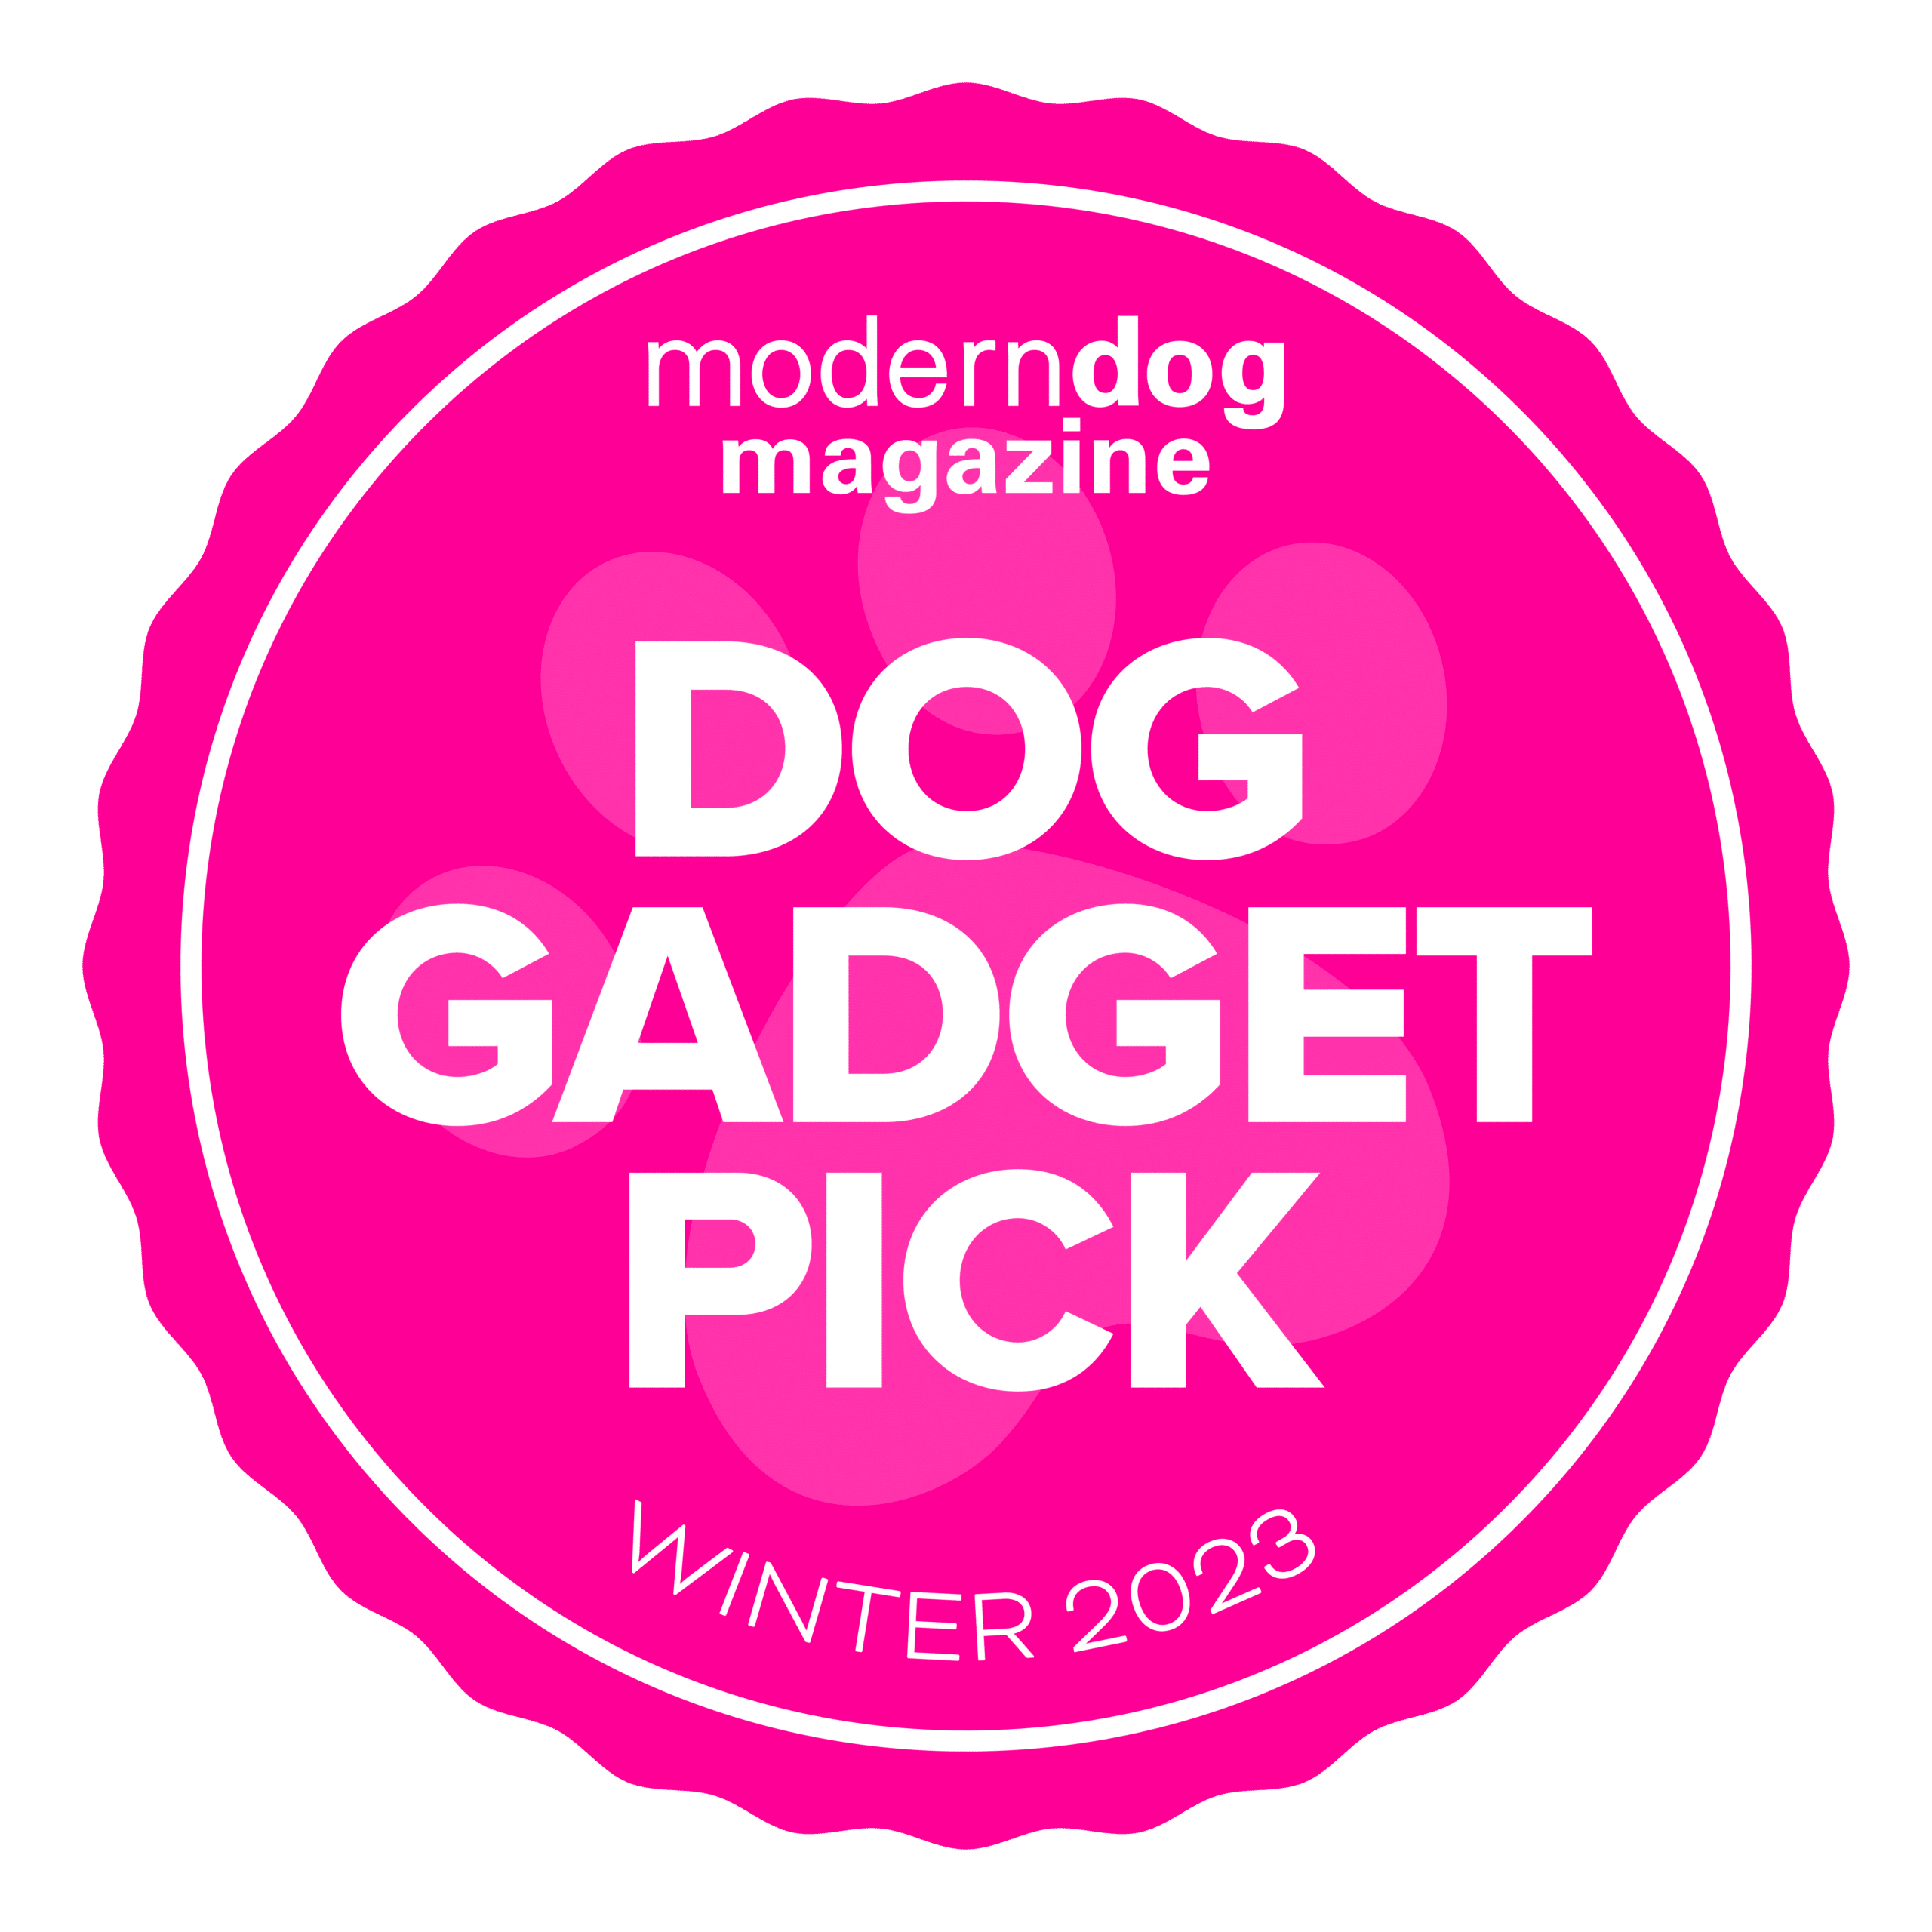 The 11 Best Smart Gadgets for Dogs and Dog Lovers